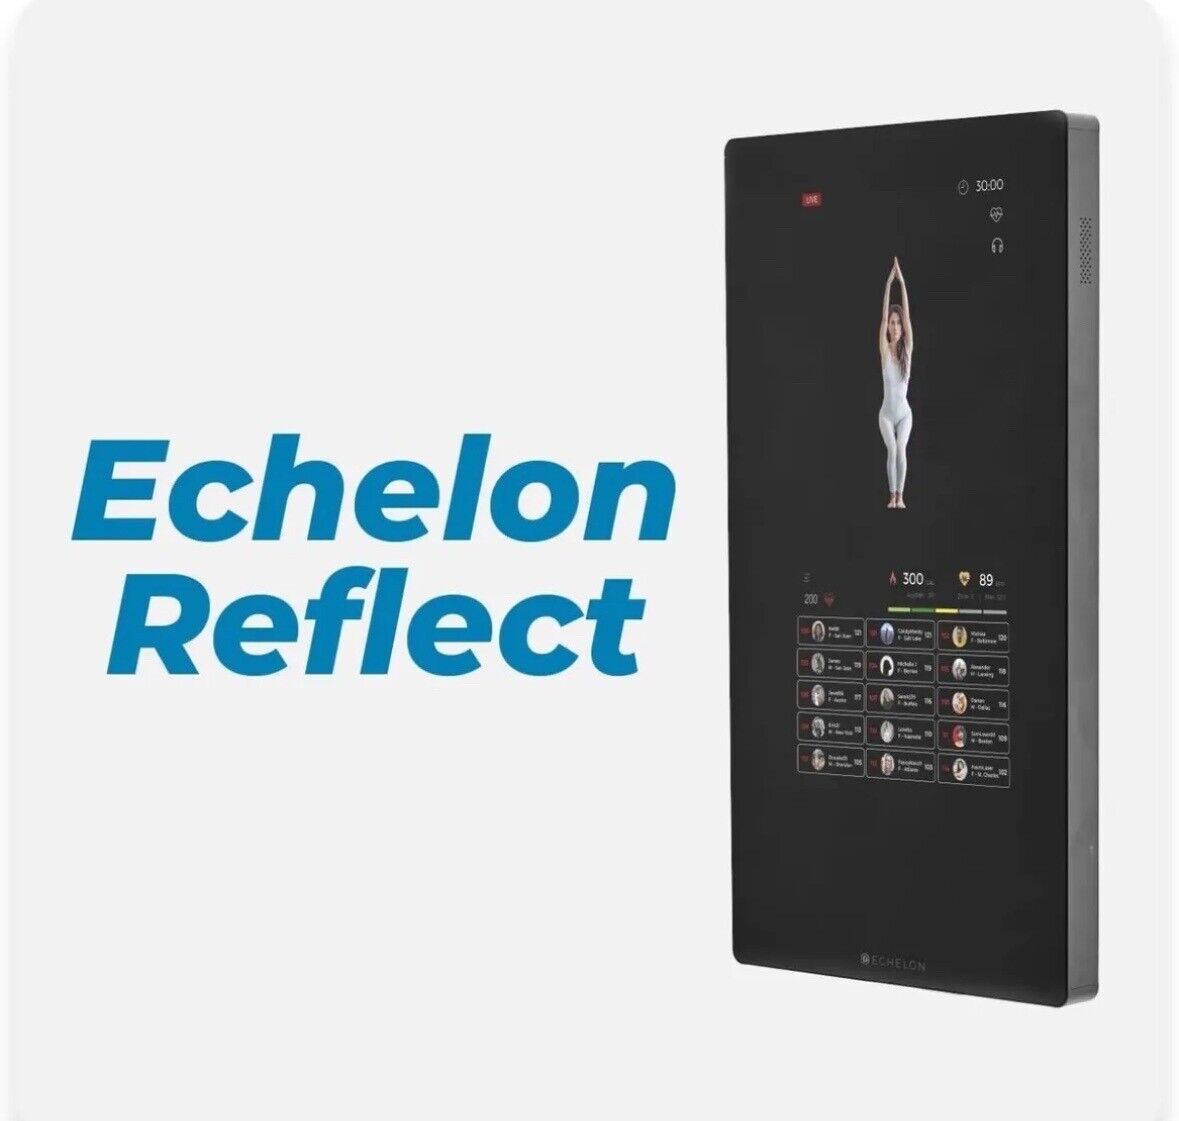 Echelon Reflect Smart Connect 40 Inch Touchscreen Fitness Mirror - New, In Box